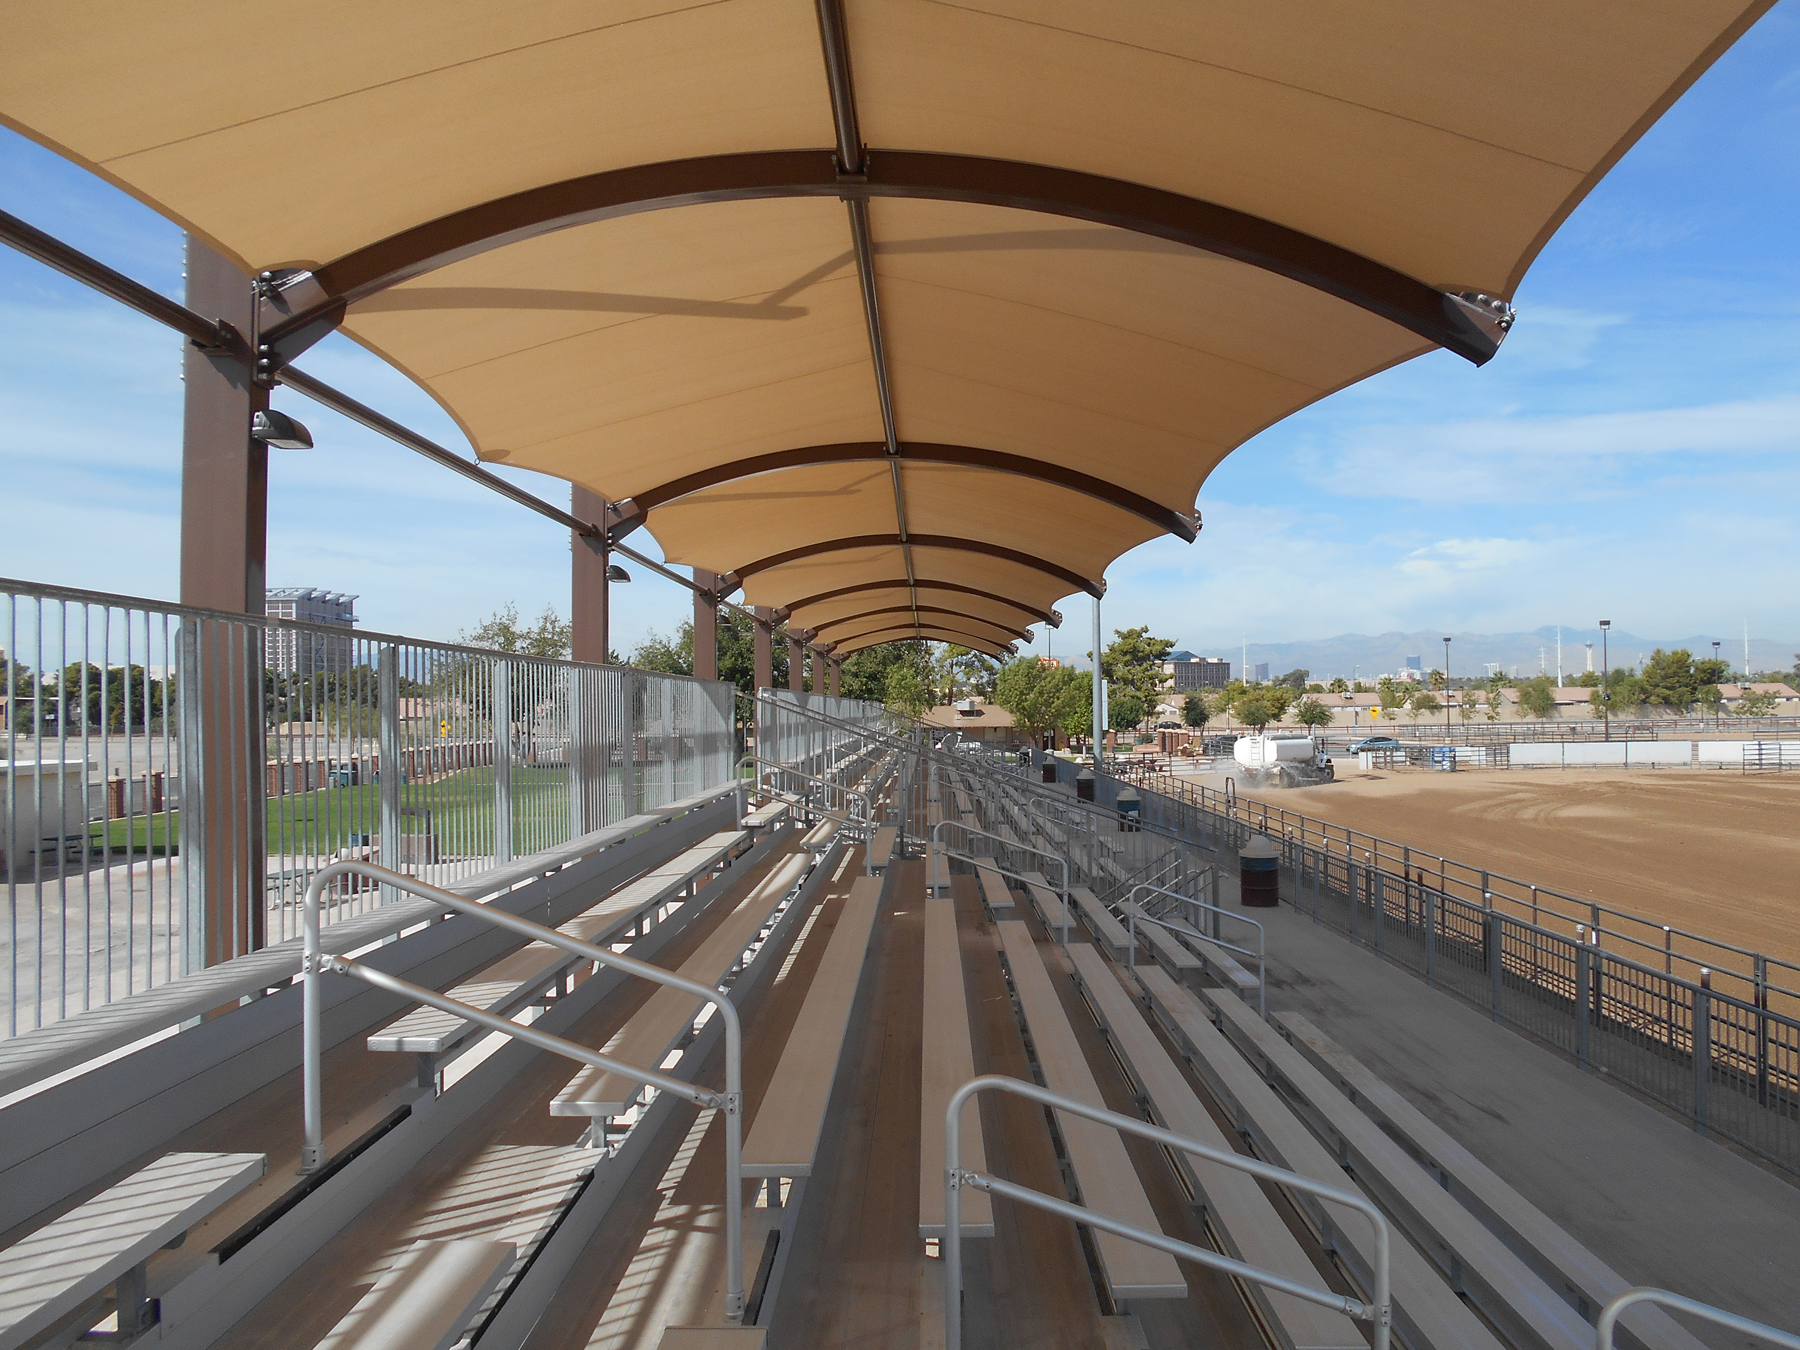 equine event center shade structure